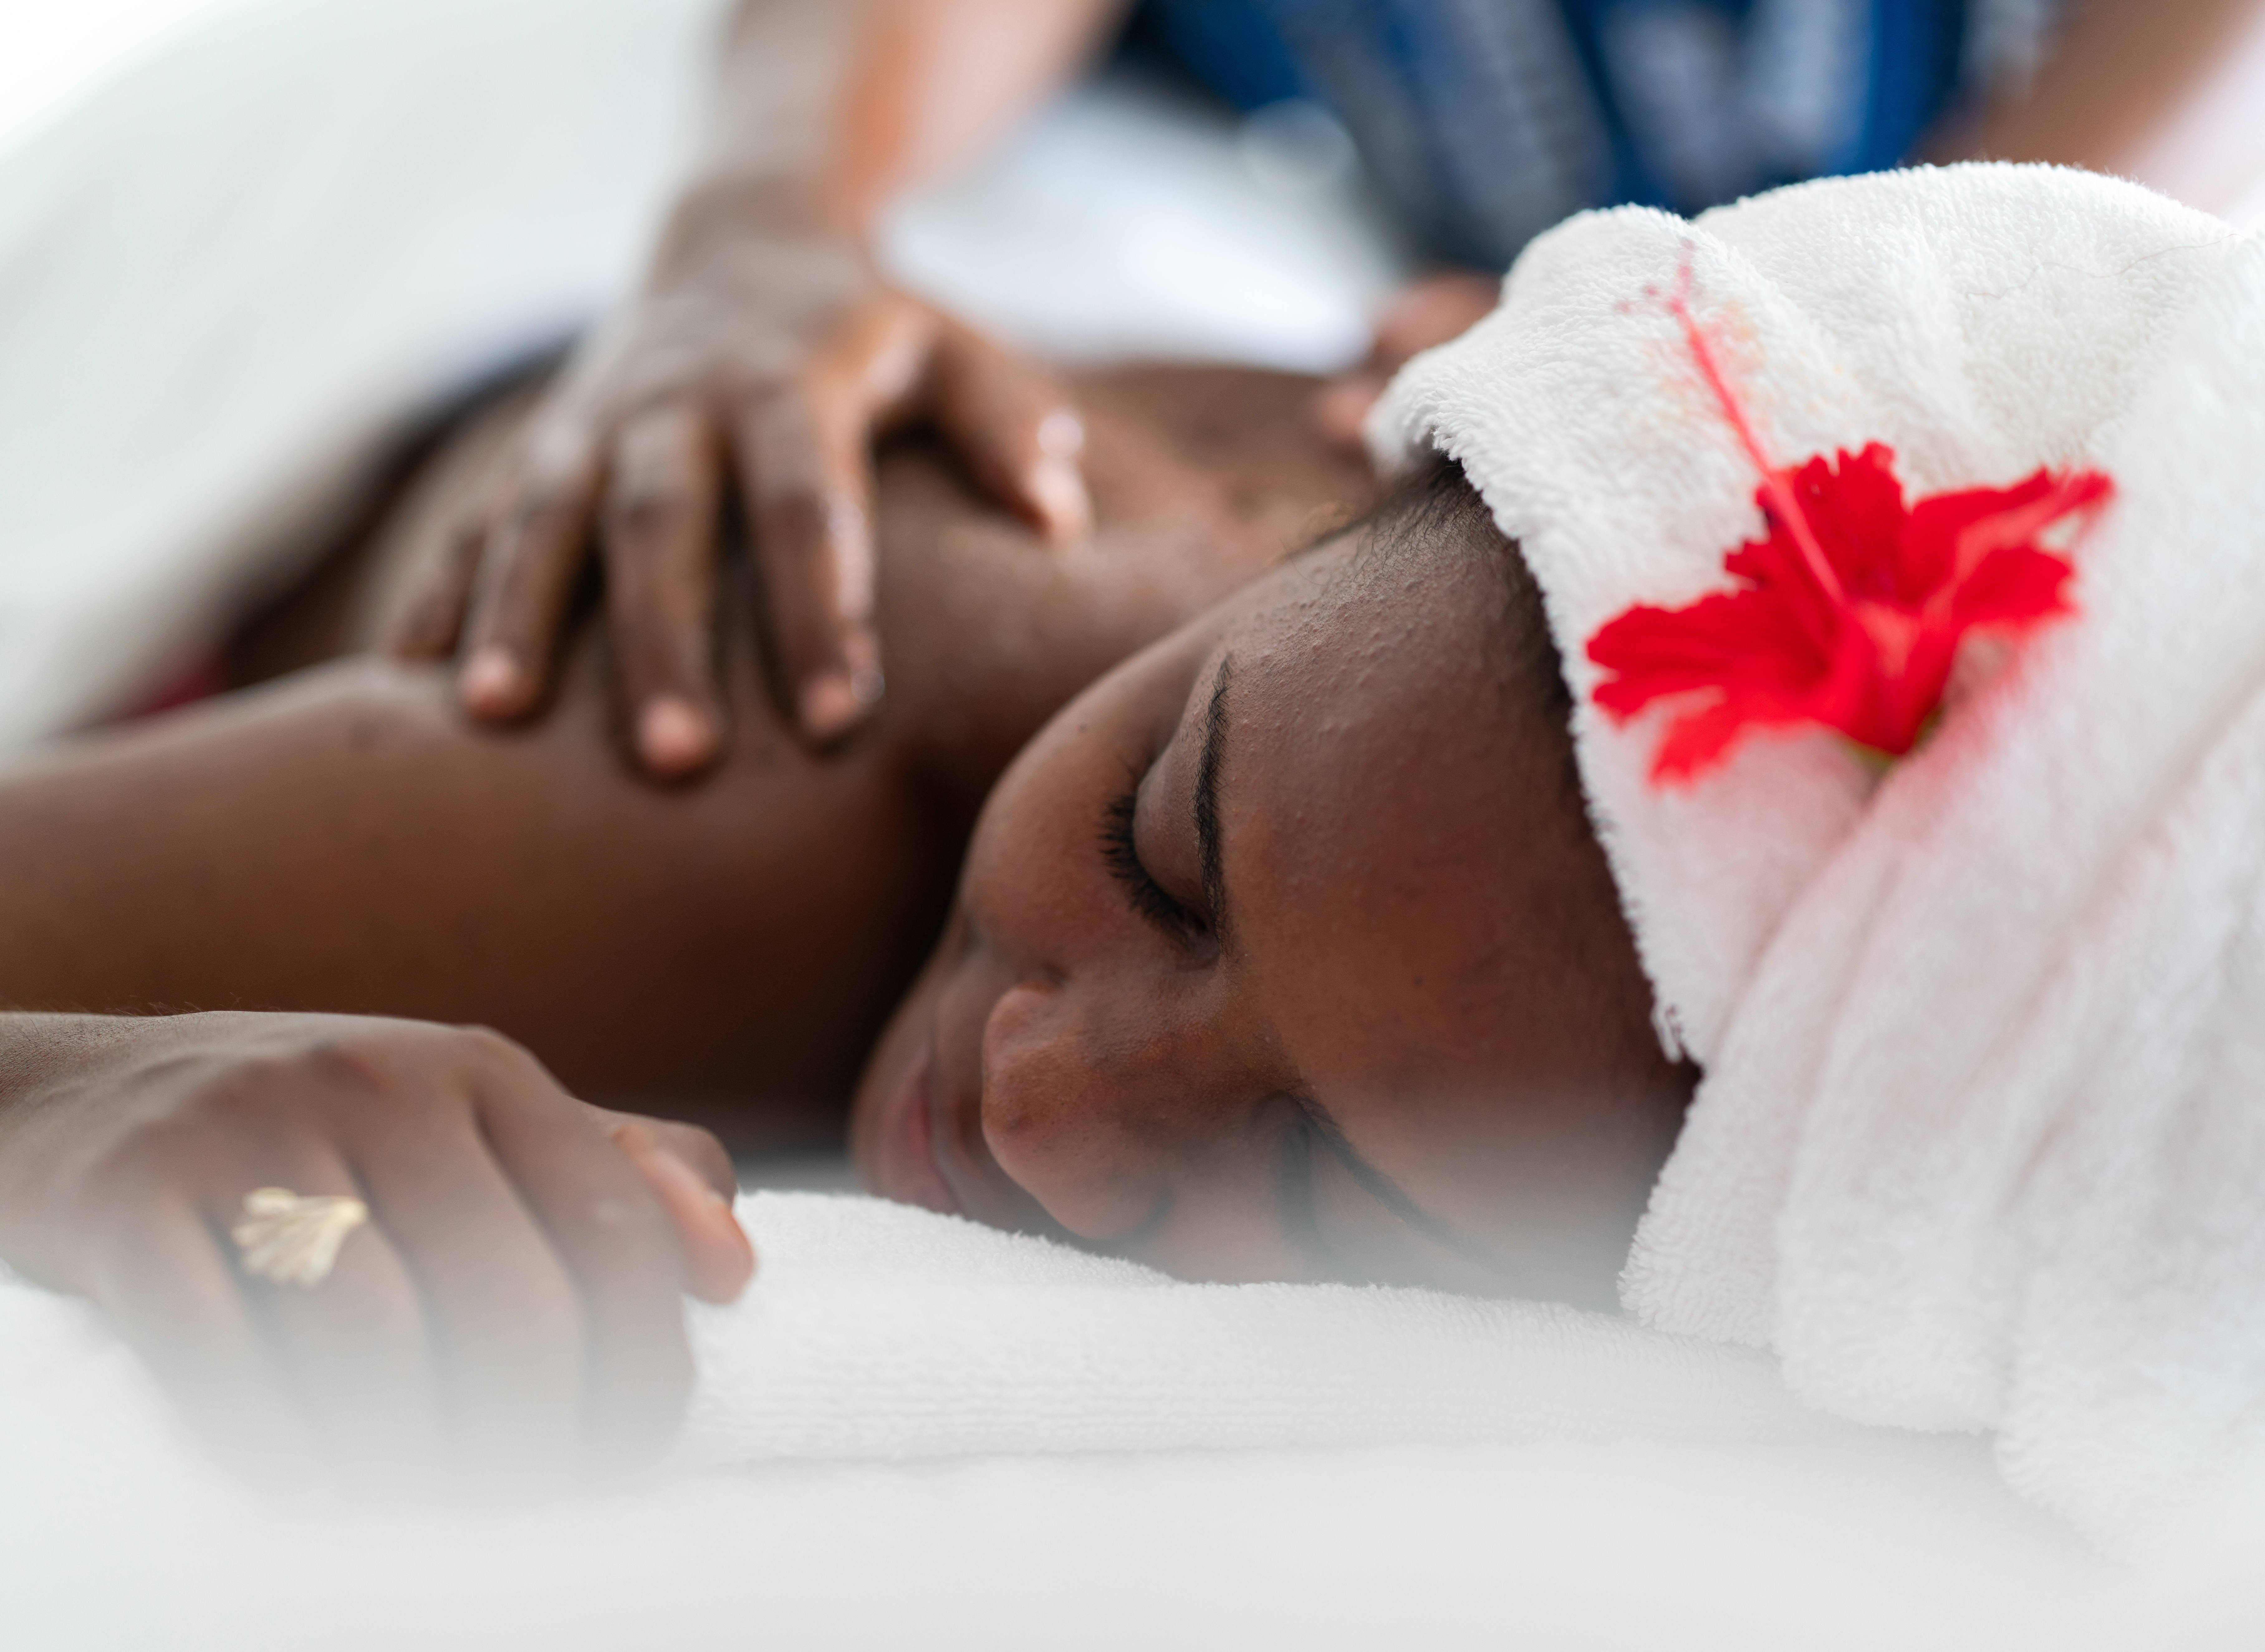 Fille africaine se faisant masser | Source : Getty Images